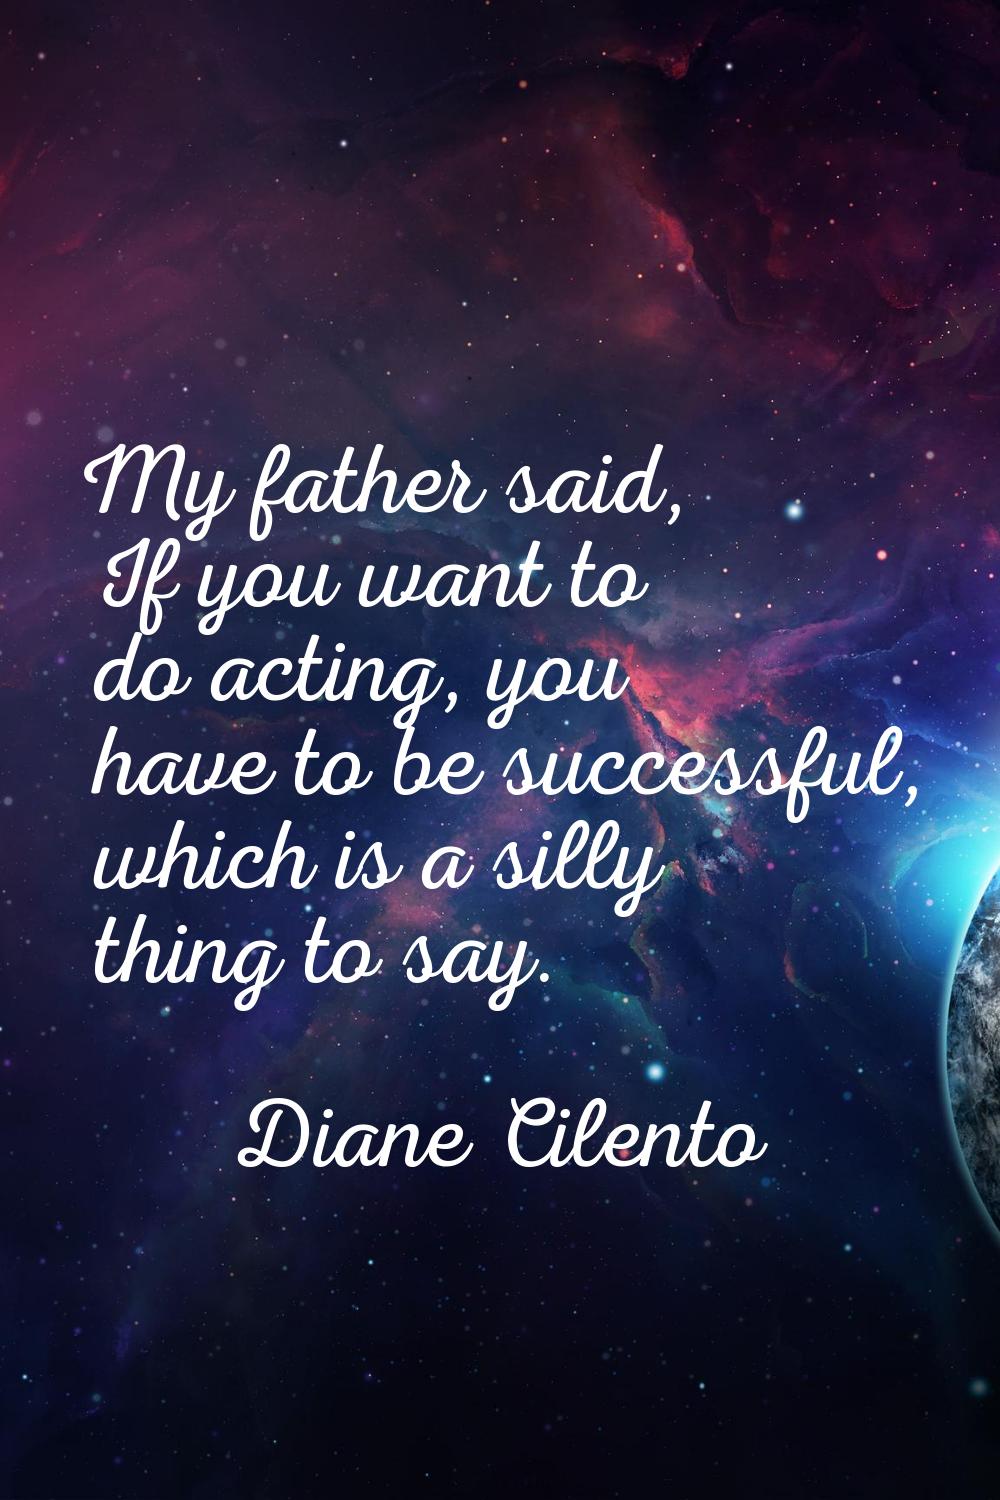 My father said, If you want to do acting, you have to be successful, which is a silly thing to say.